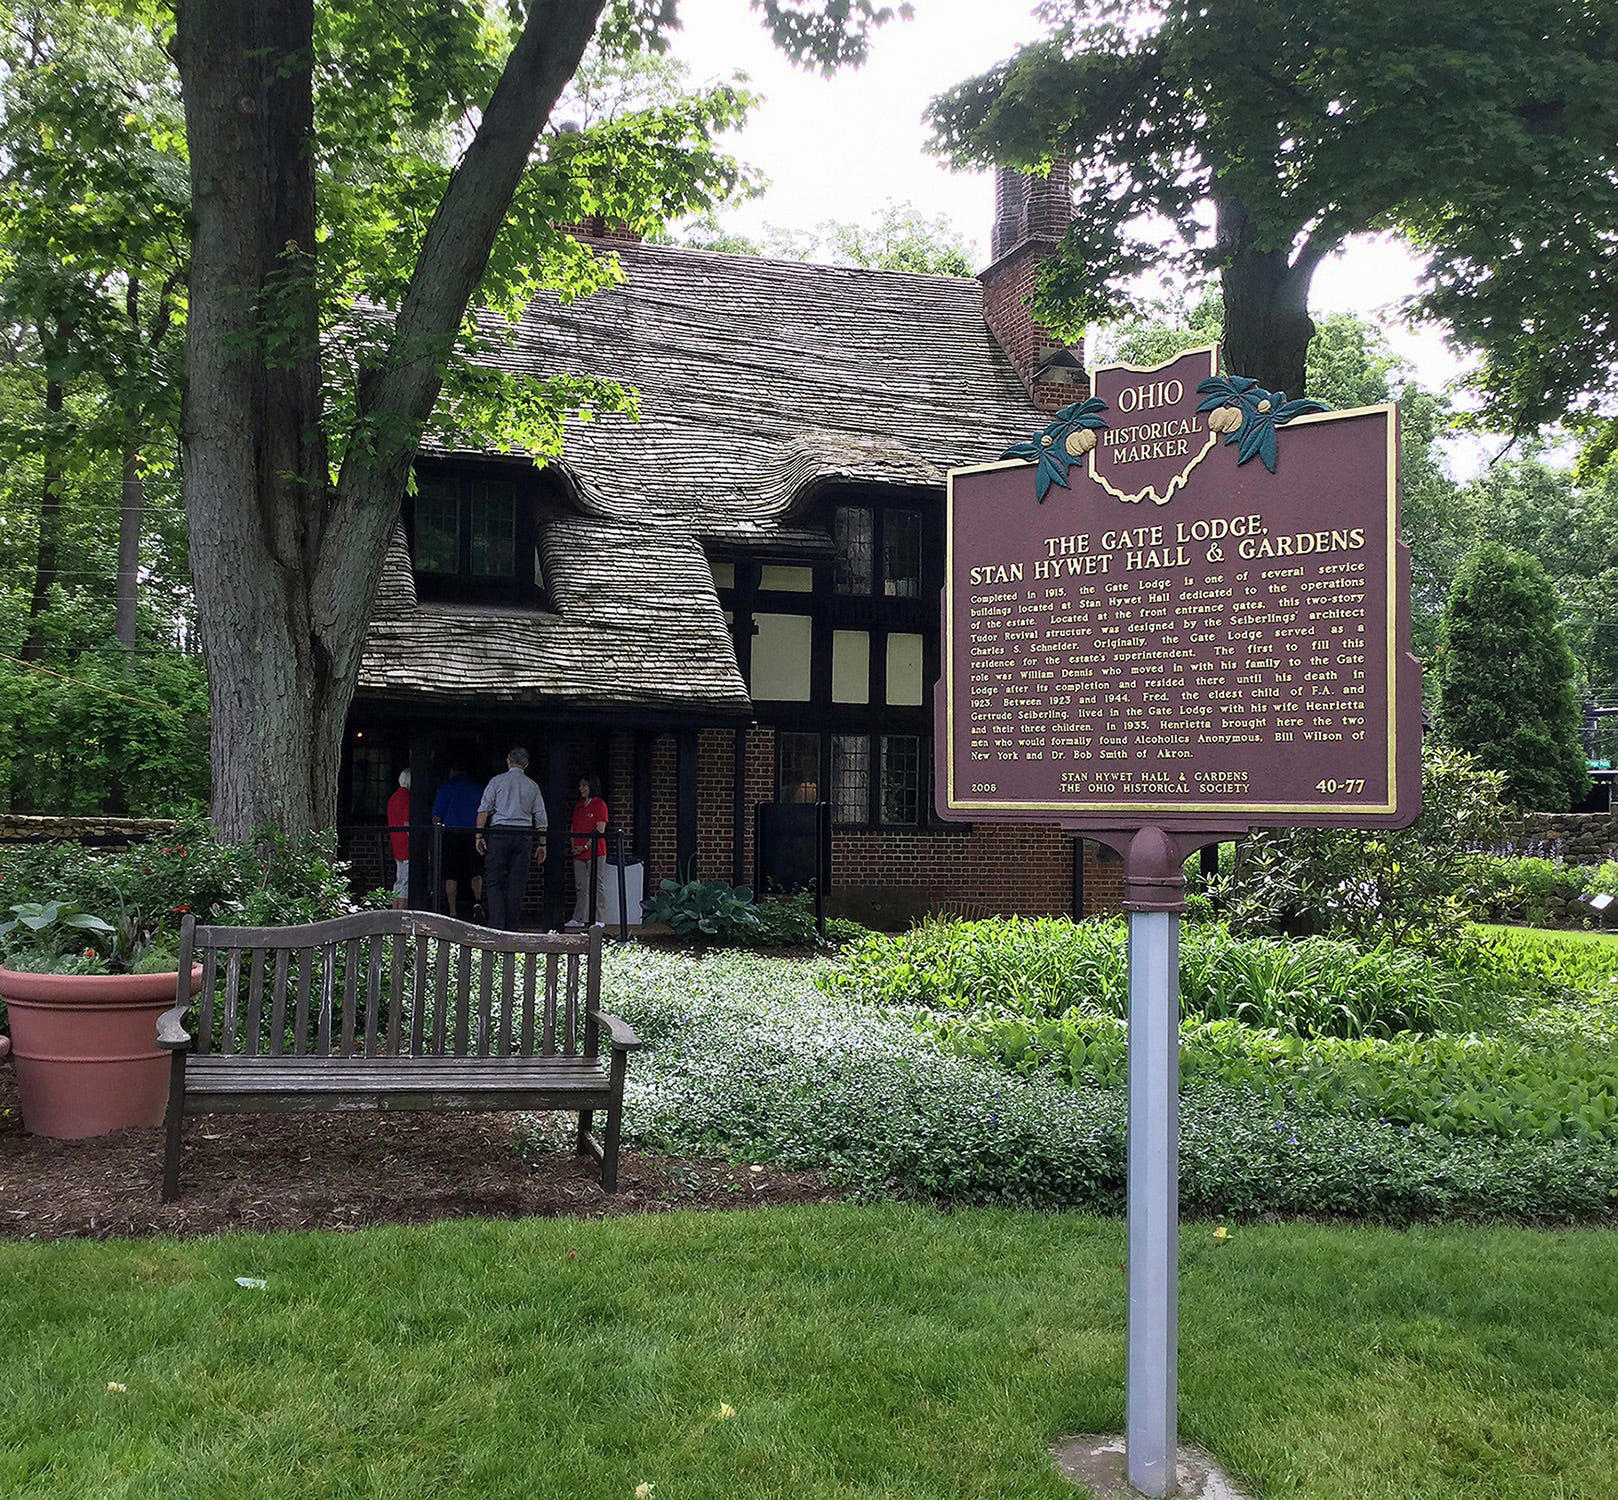 Thousands expected in Akron to mark Founders Day and birthplace of